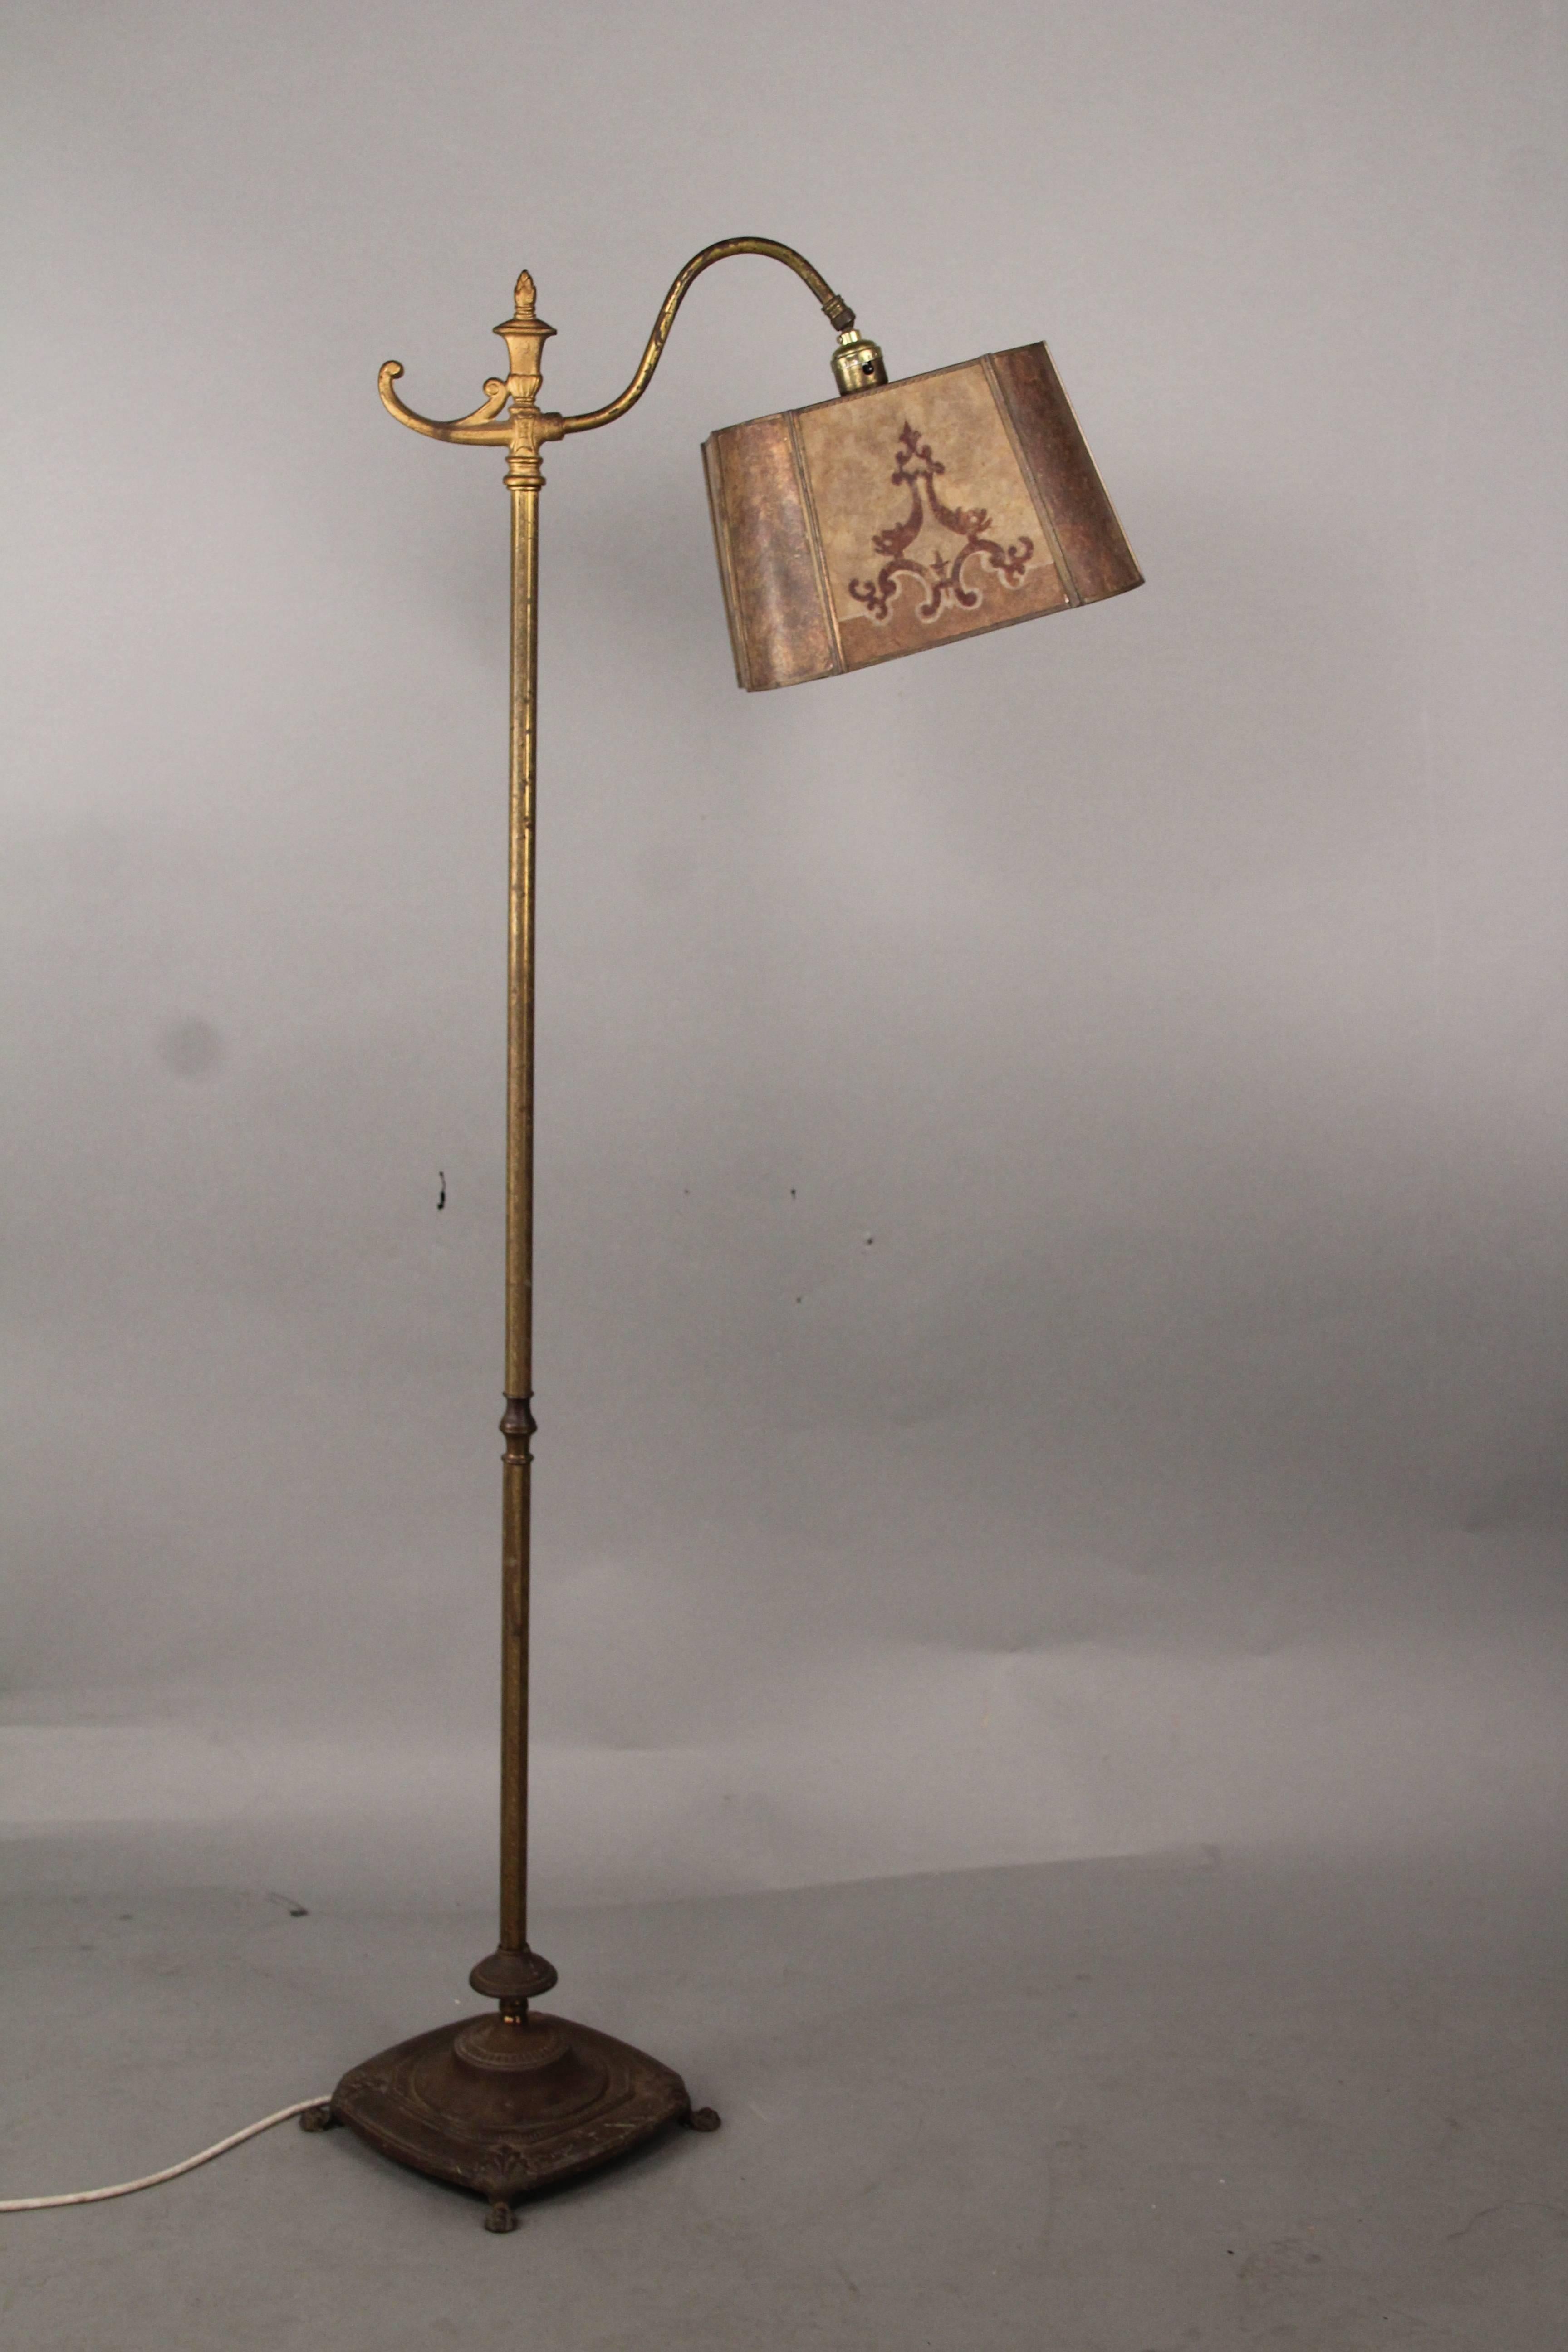 Very nice floor lamp with adjustable shade. Shade is in good condition and his beautiful when it lights up. Would fit nicely in a Tudor, Arts & Crafts or Spanish Revival Home. Measures: 52